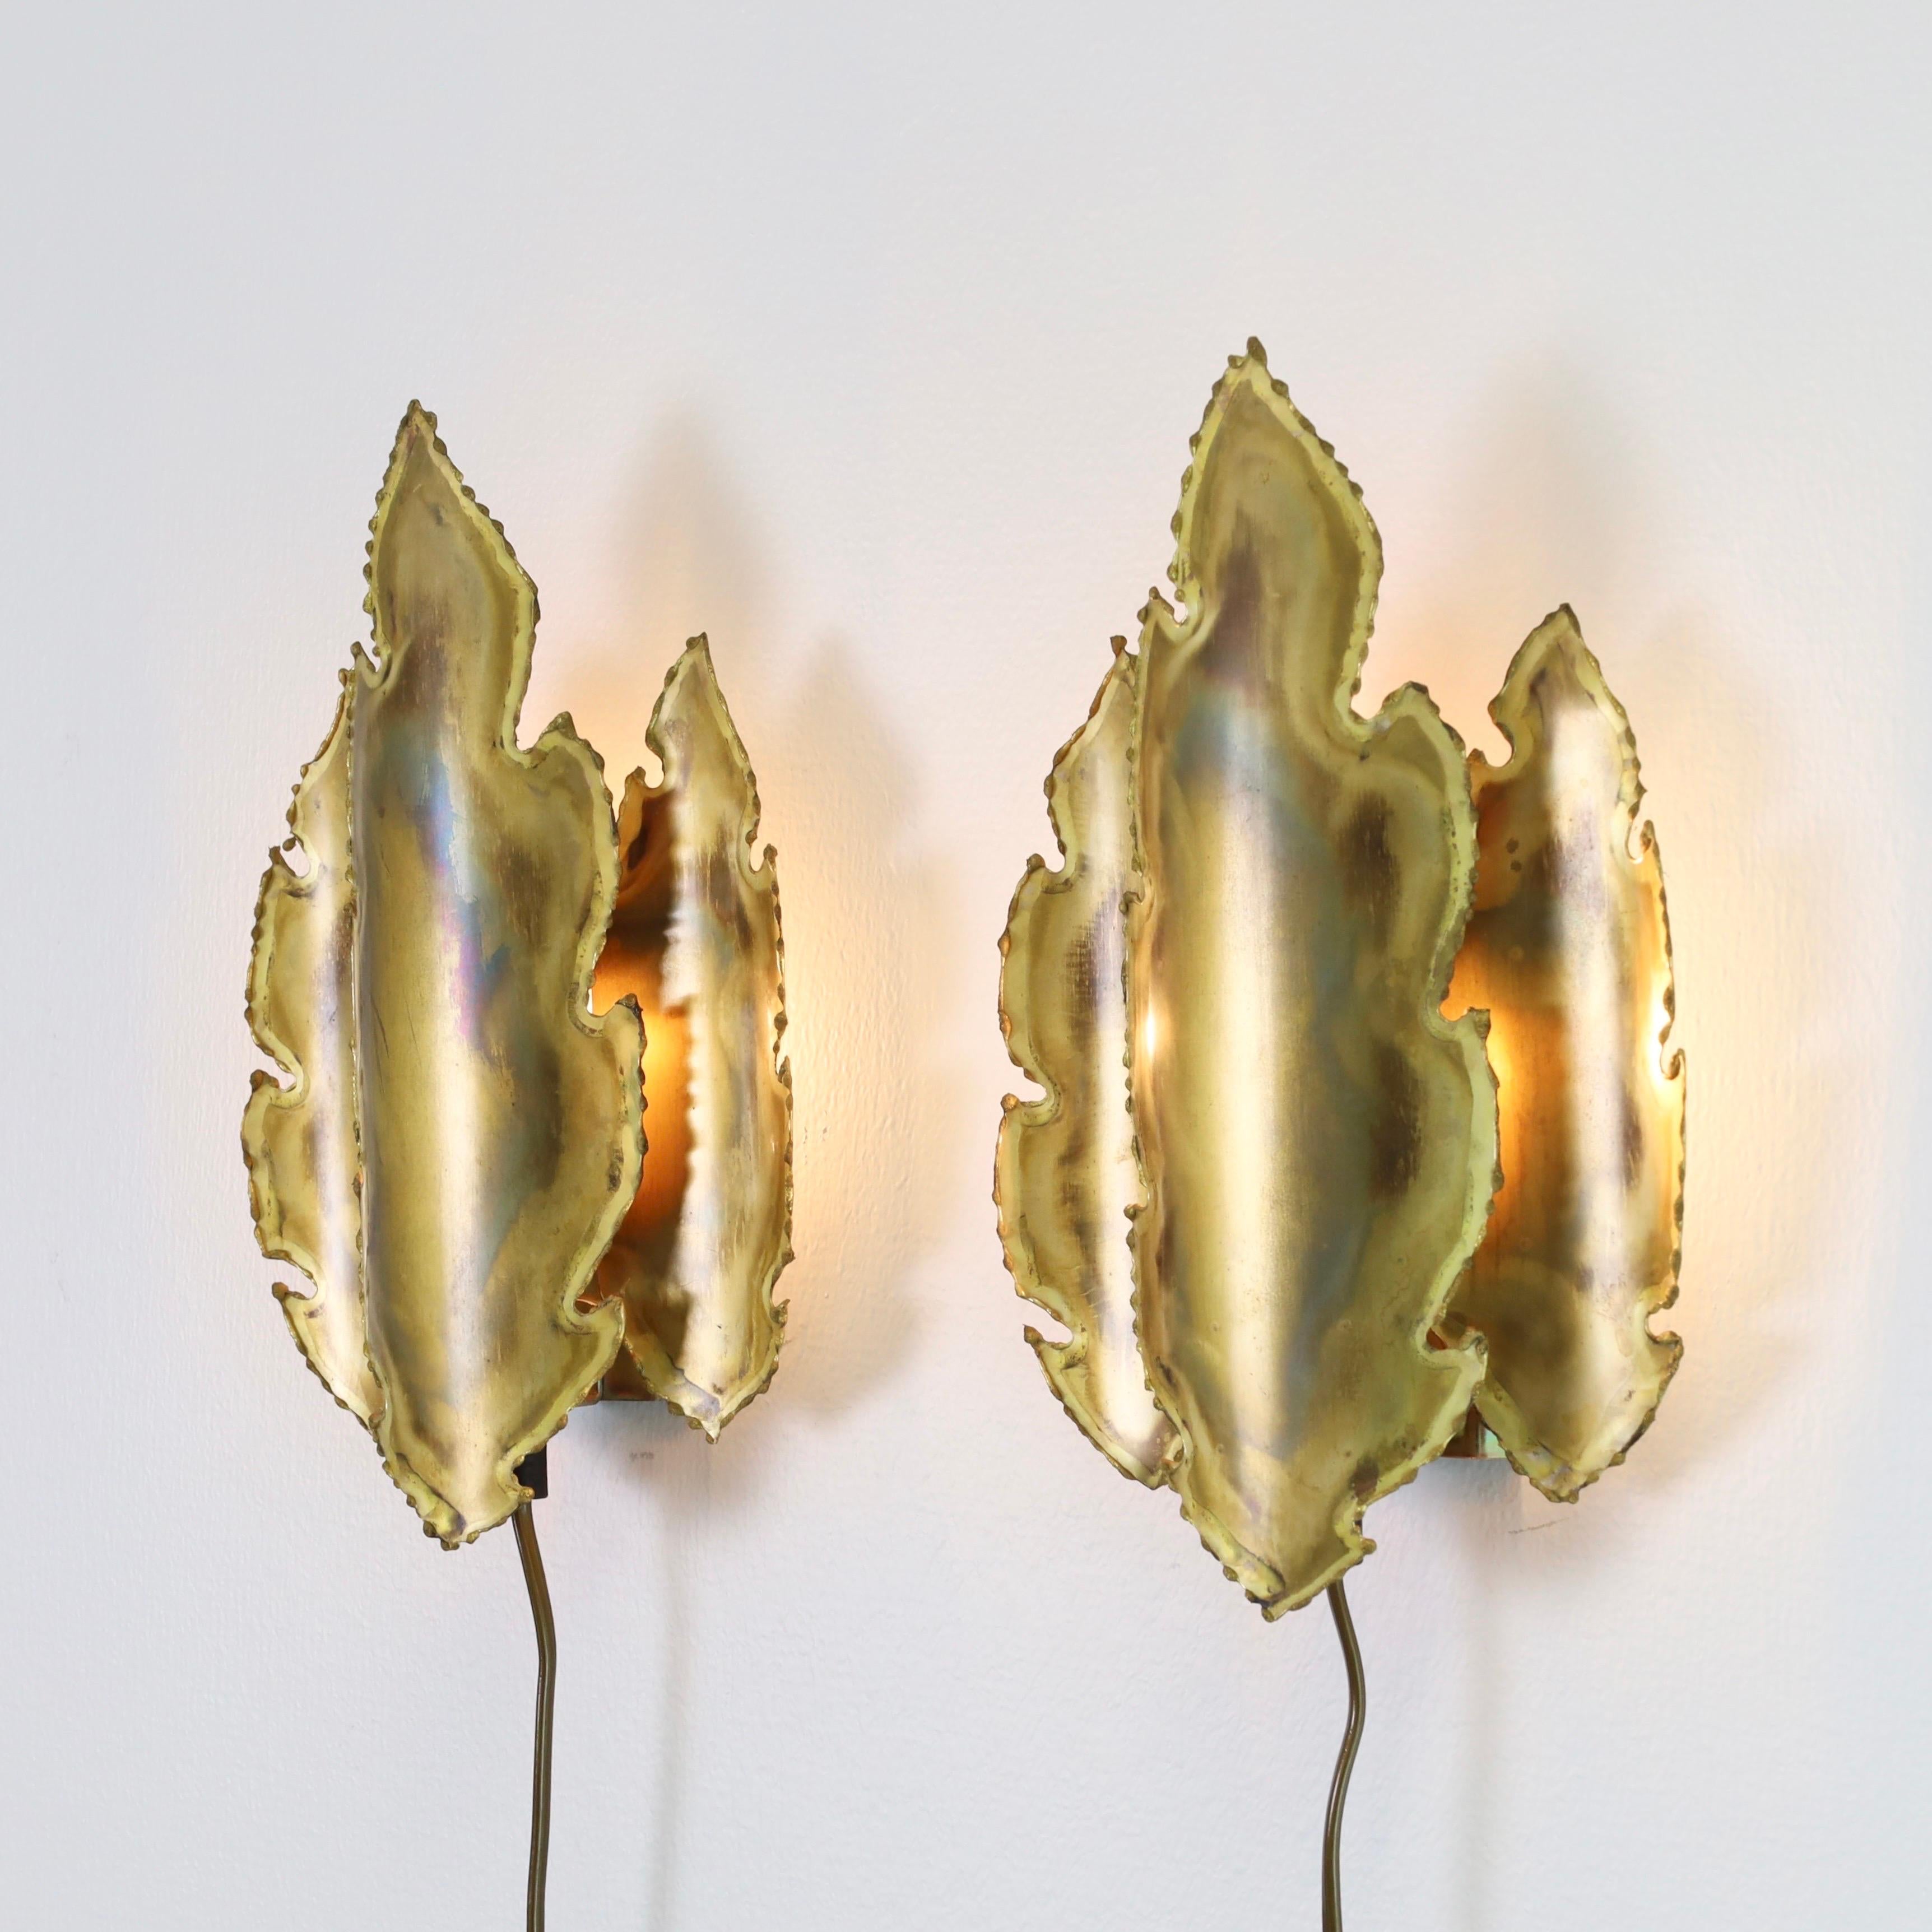 Pair of Leaf-Shaped Brass Wall Lamps by Svend Aage Holm Sorensen, 1960s, Denmark In Good Condition For Sale In Værløse, DK